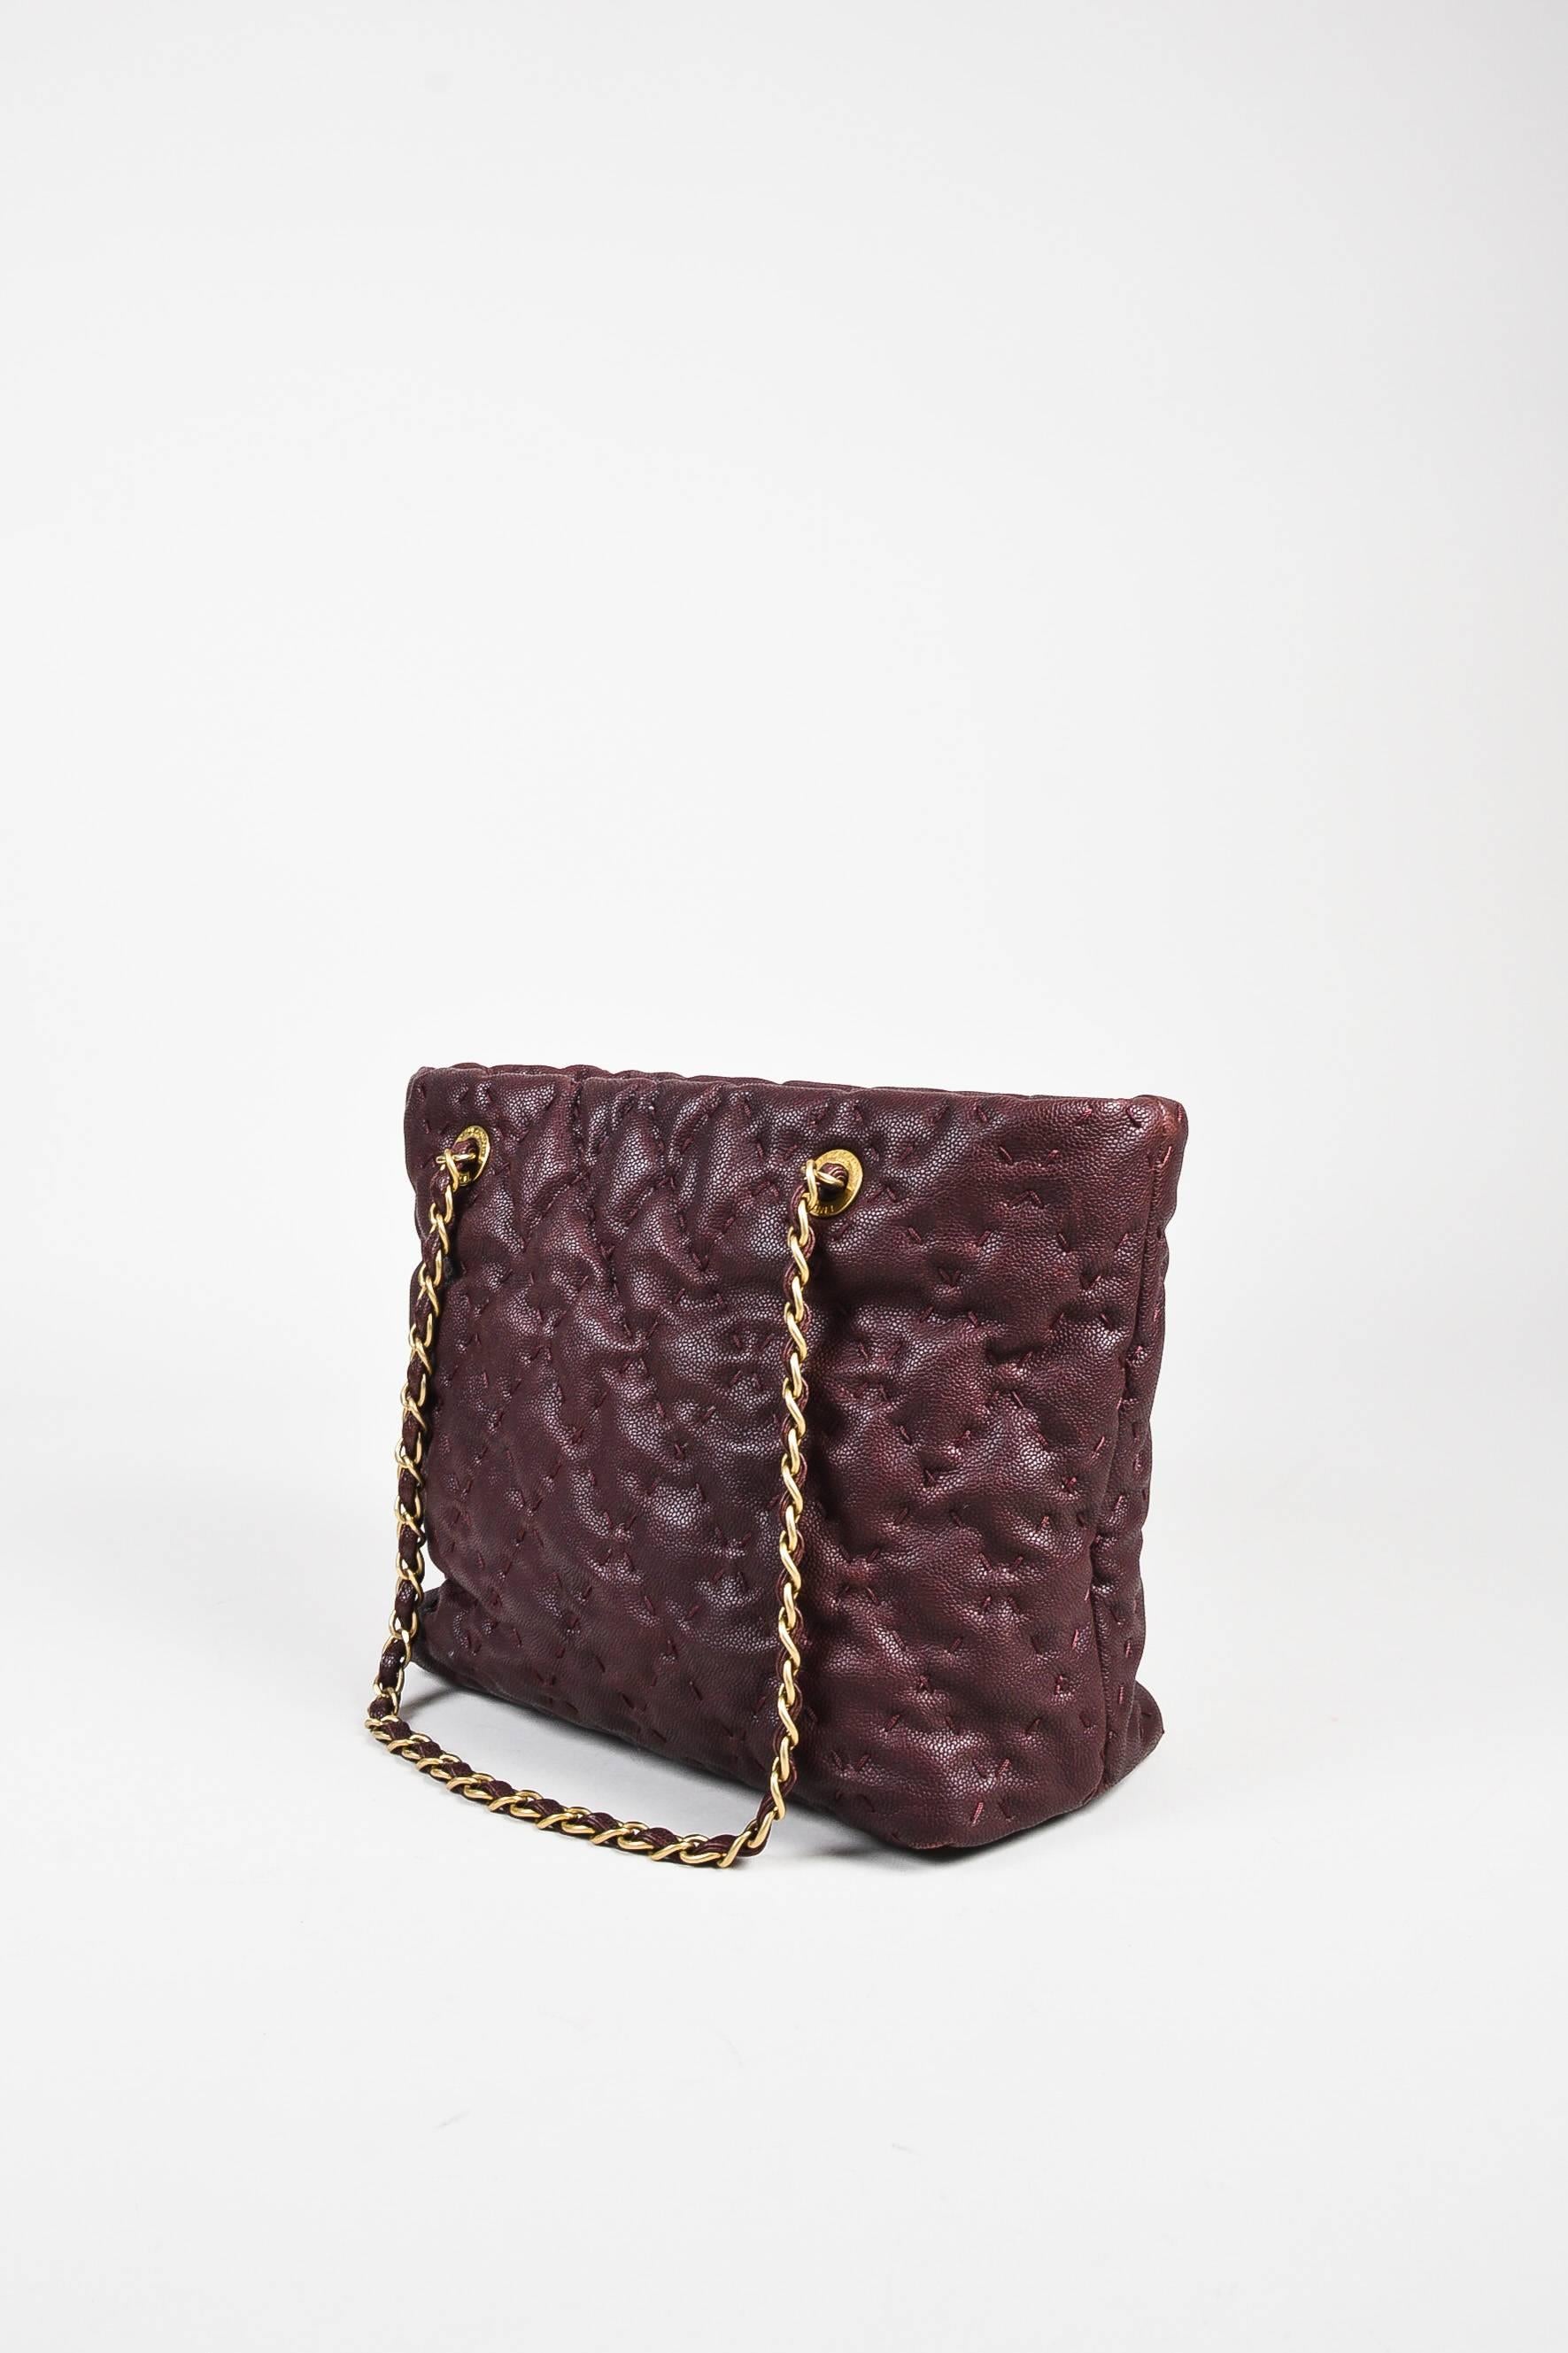 Plum quilted shoulder tote bag by Chanel.  Gold tone chain link shoulder straps, front strap has 